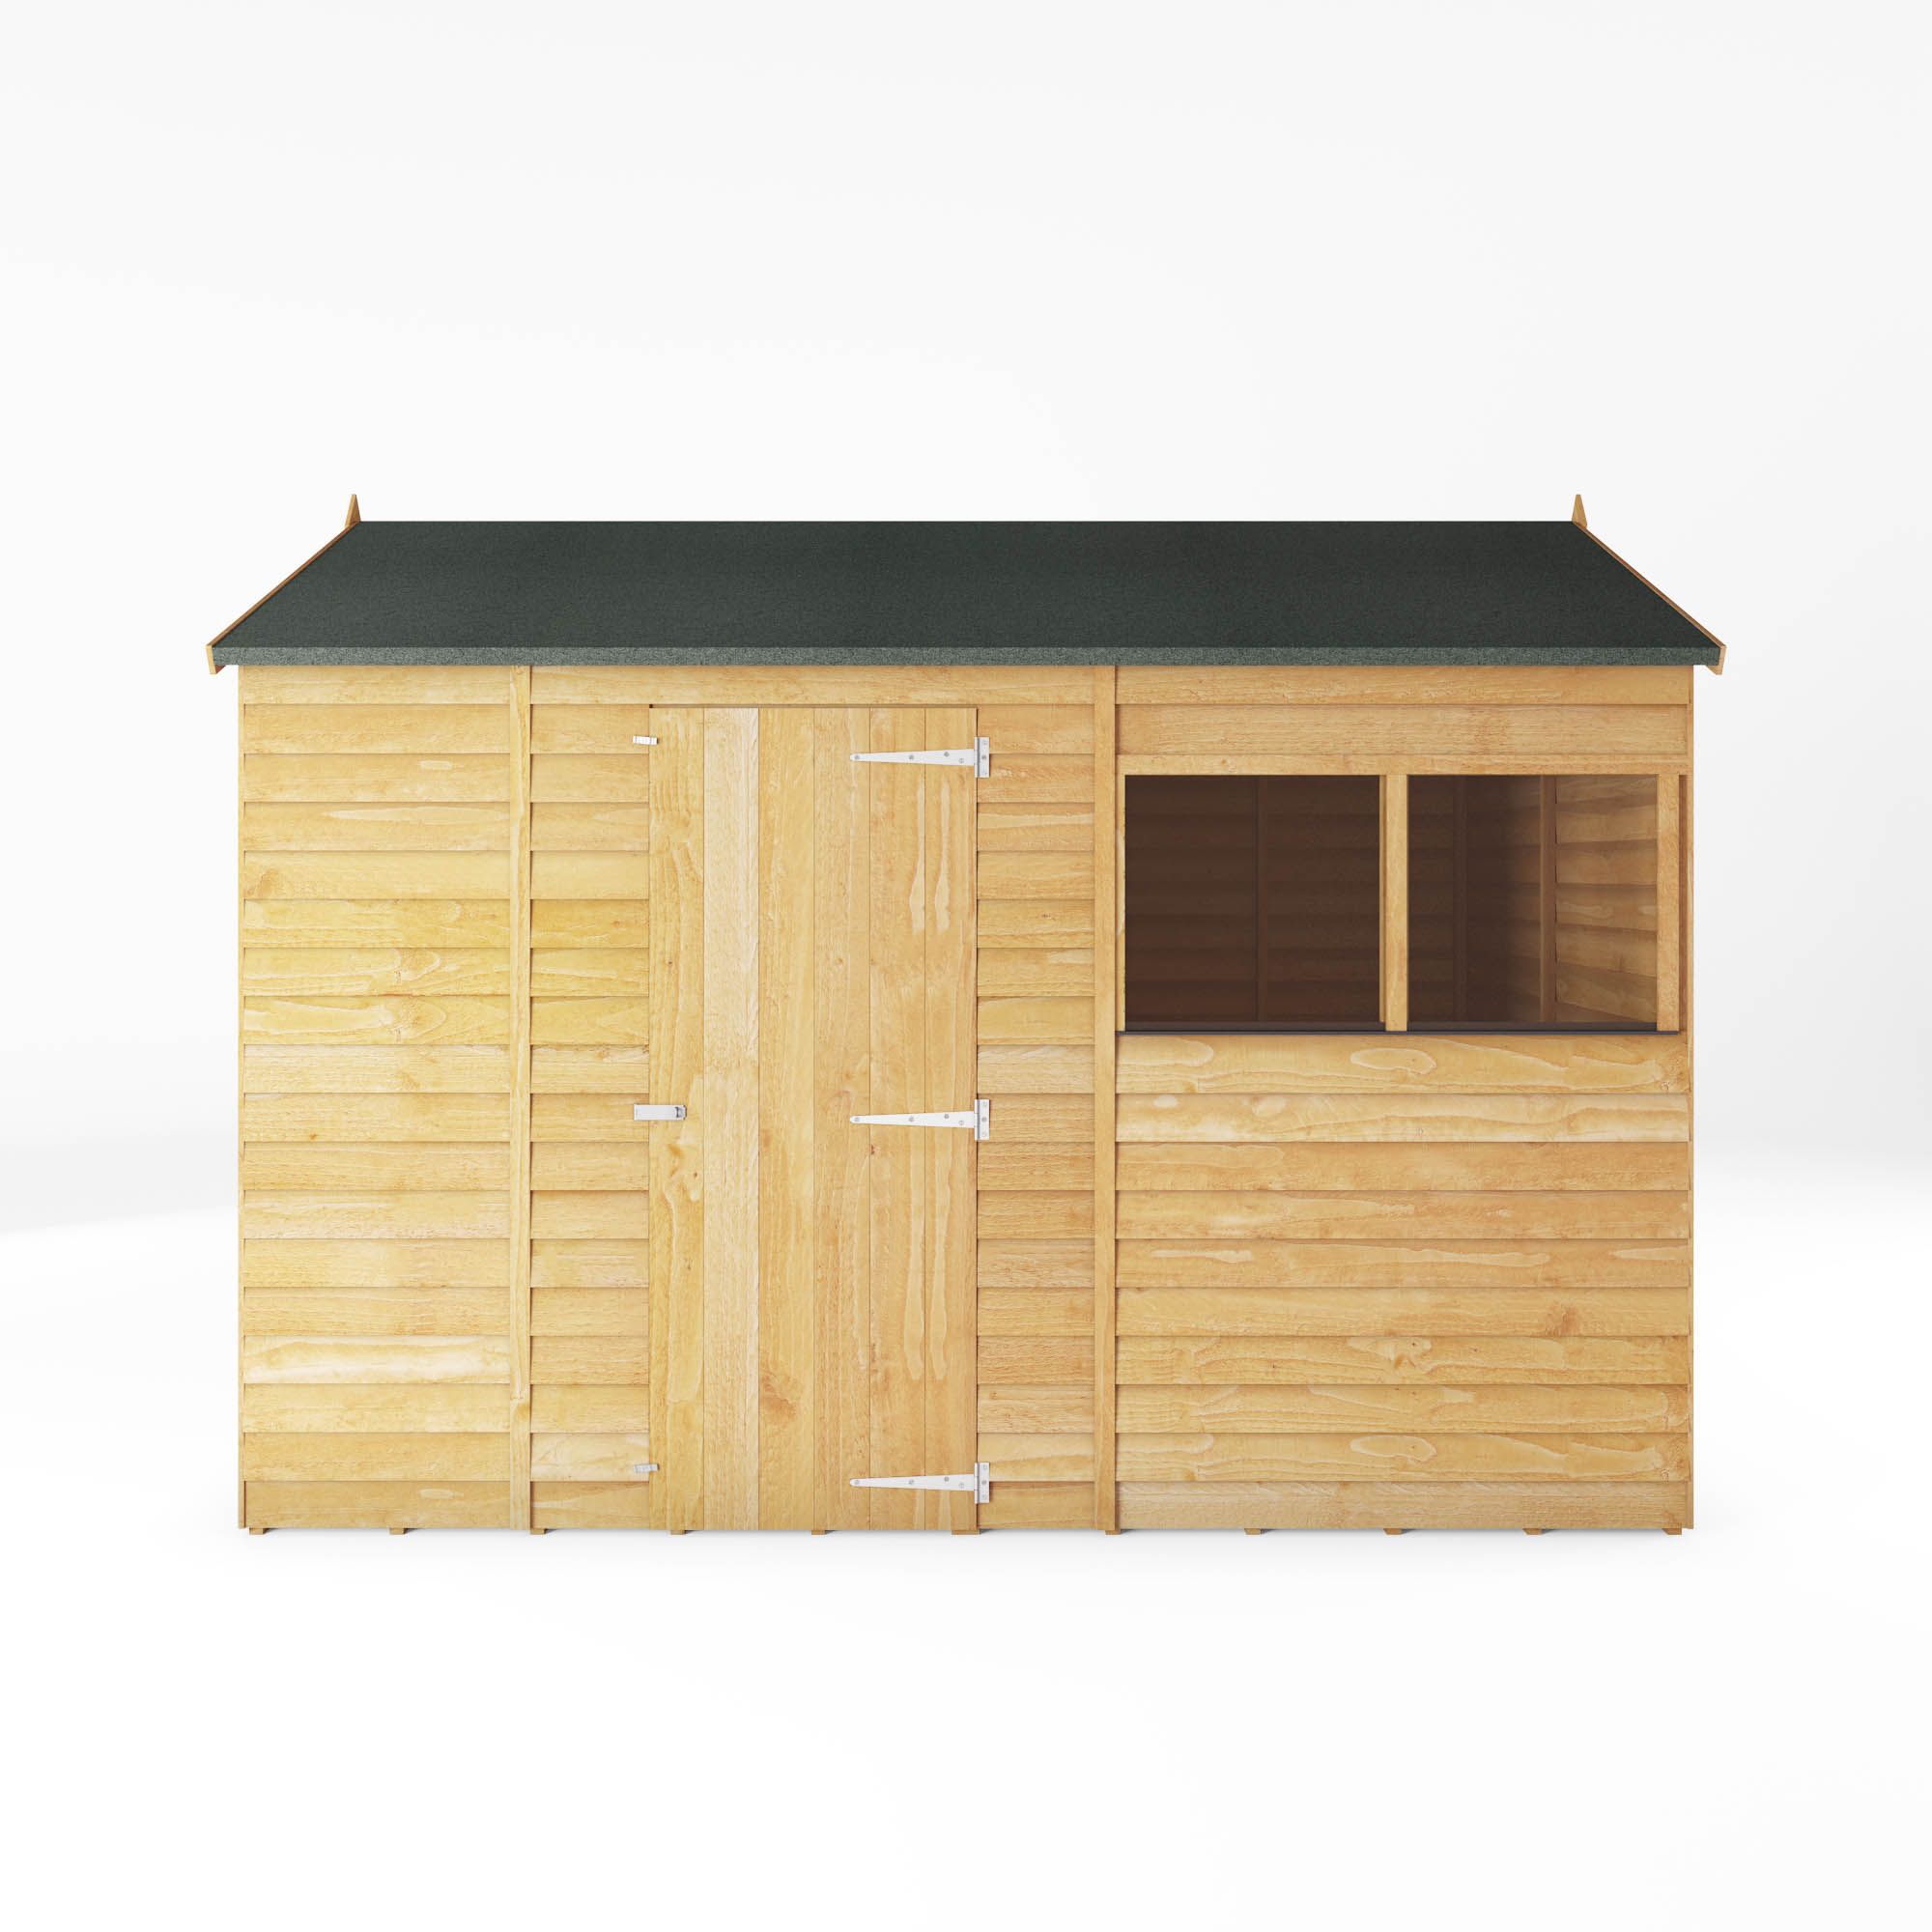 Mercia 10x6 ft Reverse apex Wooden Shed with floor & 2 windows